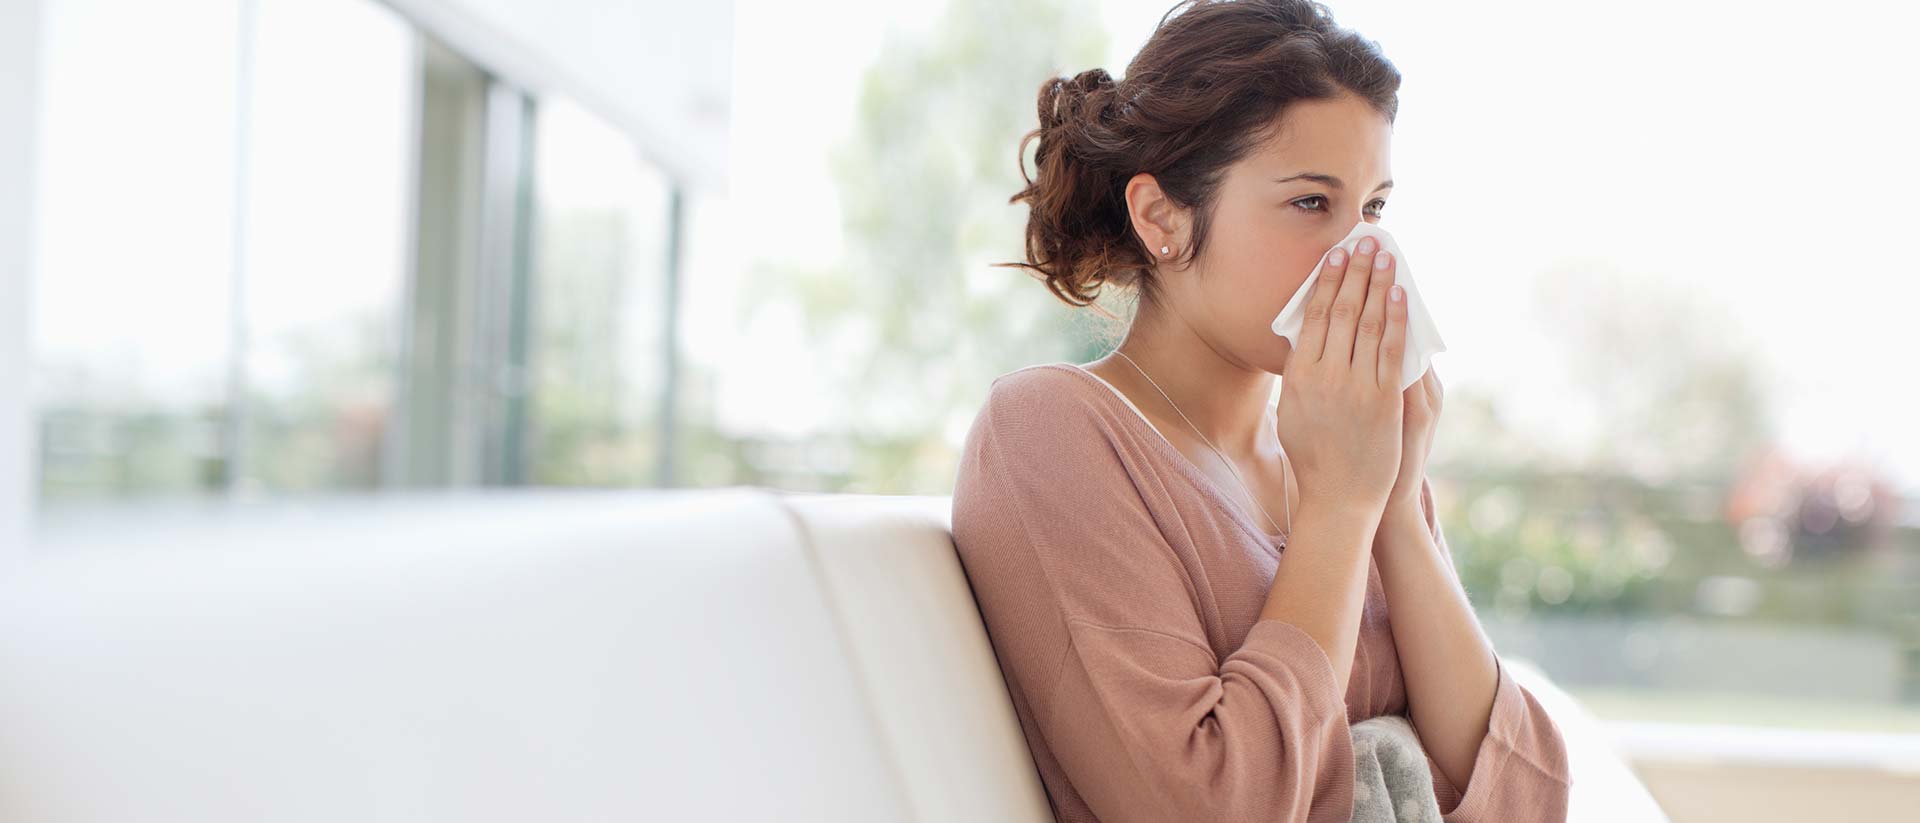 Cold & flu – The most common viral infections